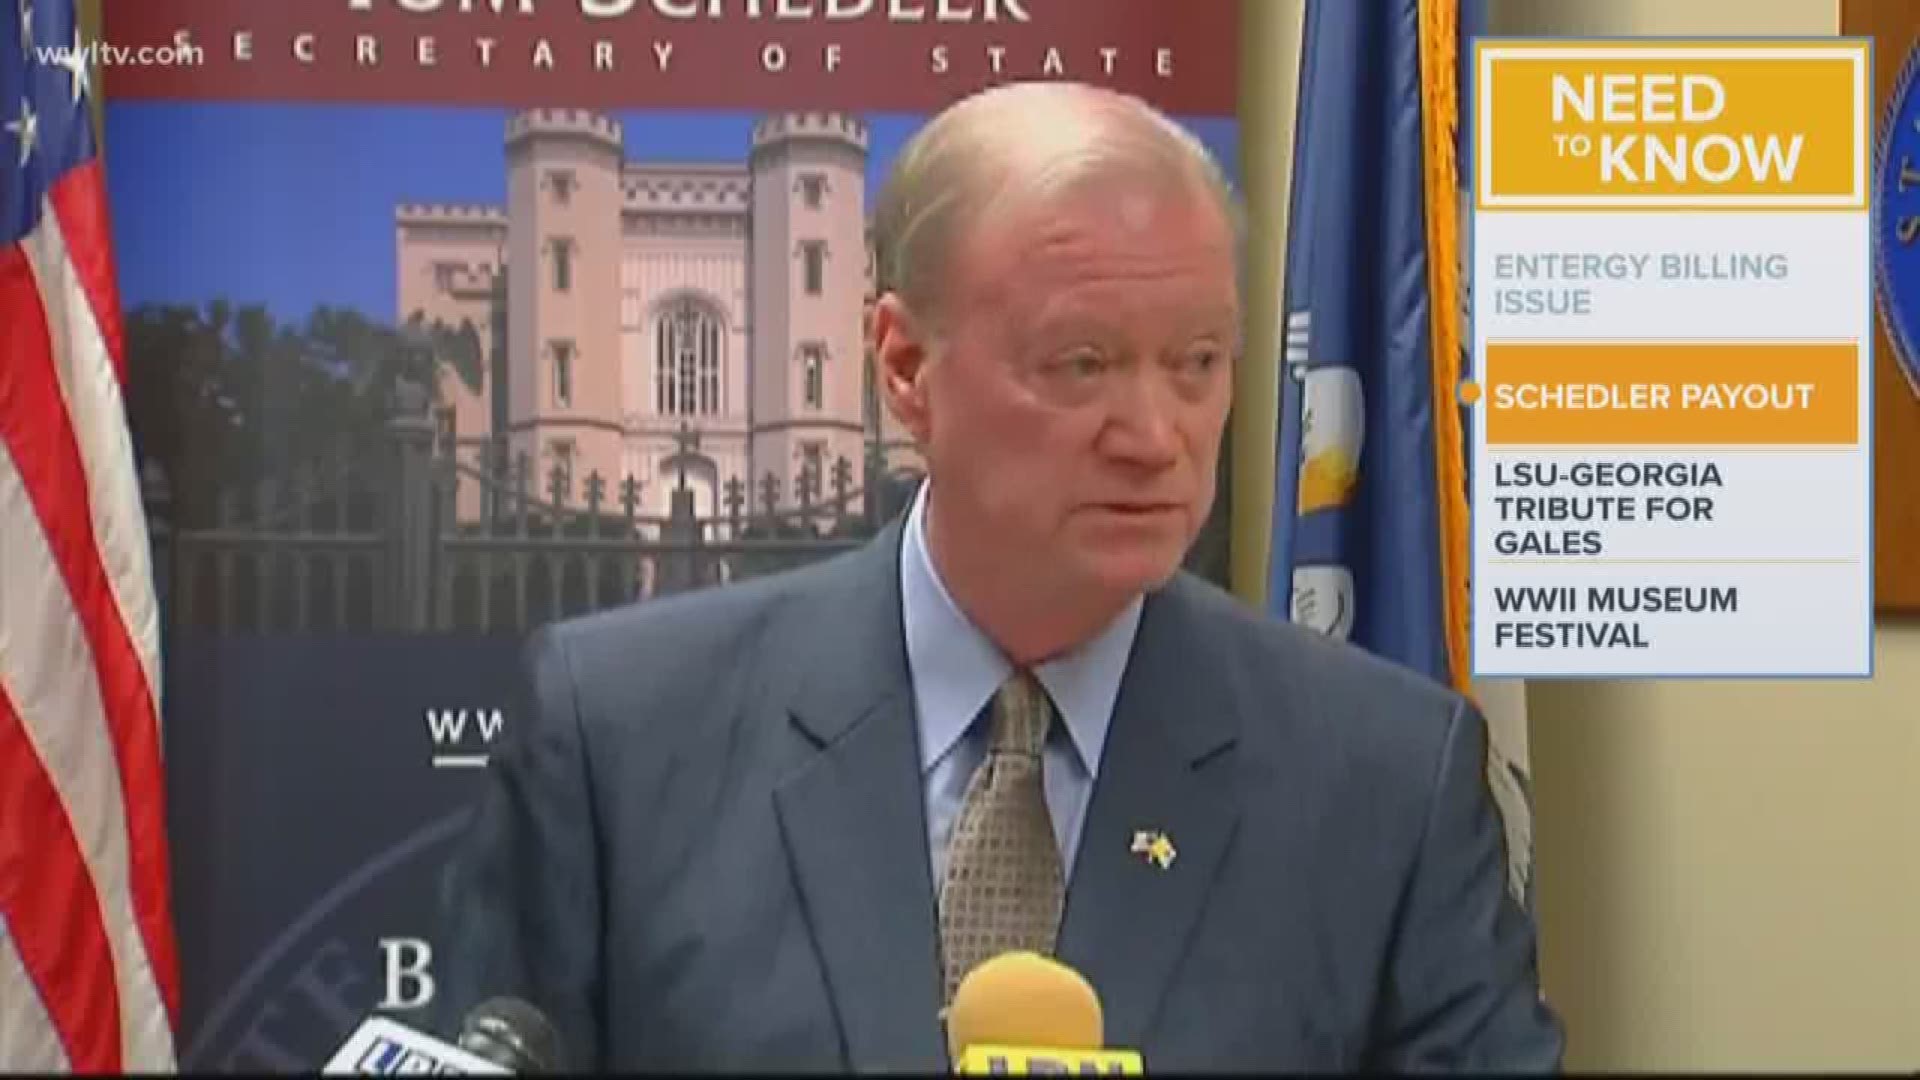 The payments will resolve legal claims that former Secretary of State Tom Schedler sexually harassed a woman who worked for him.